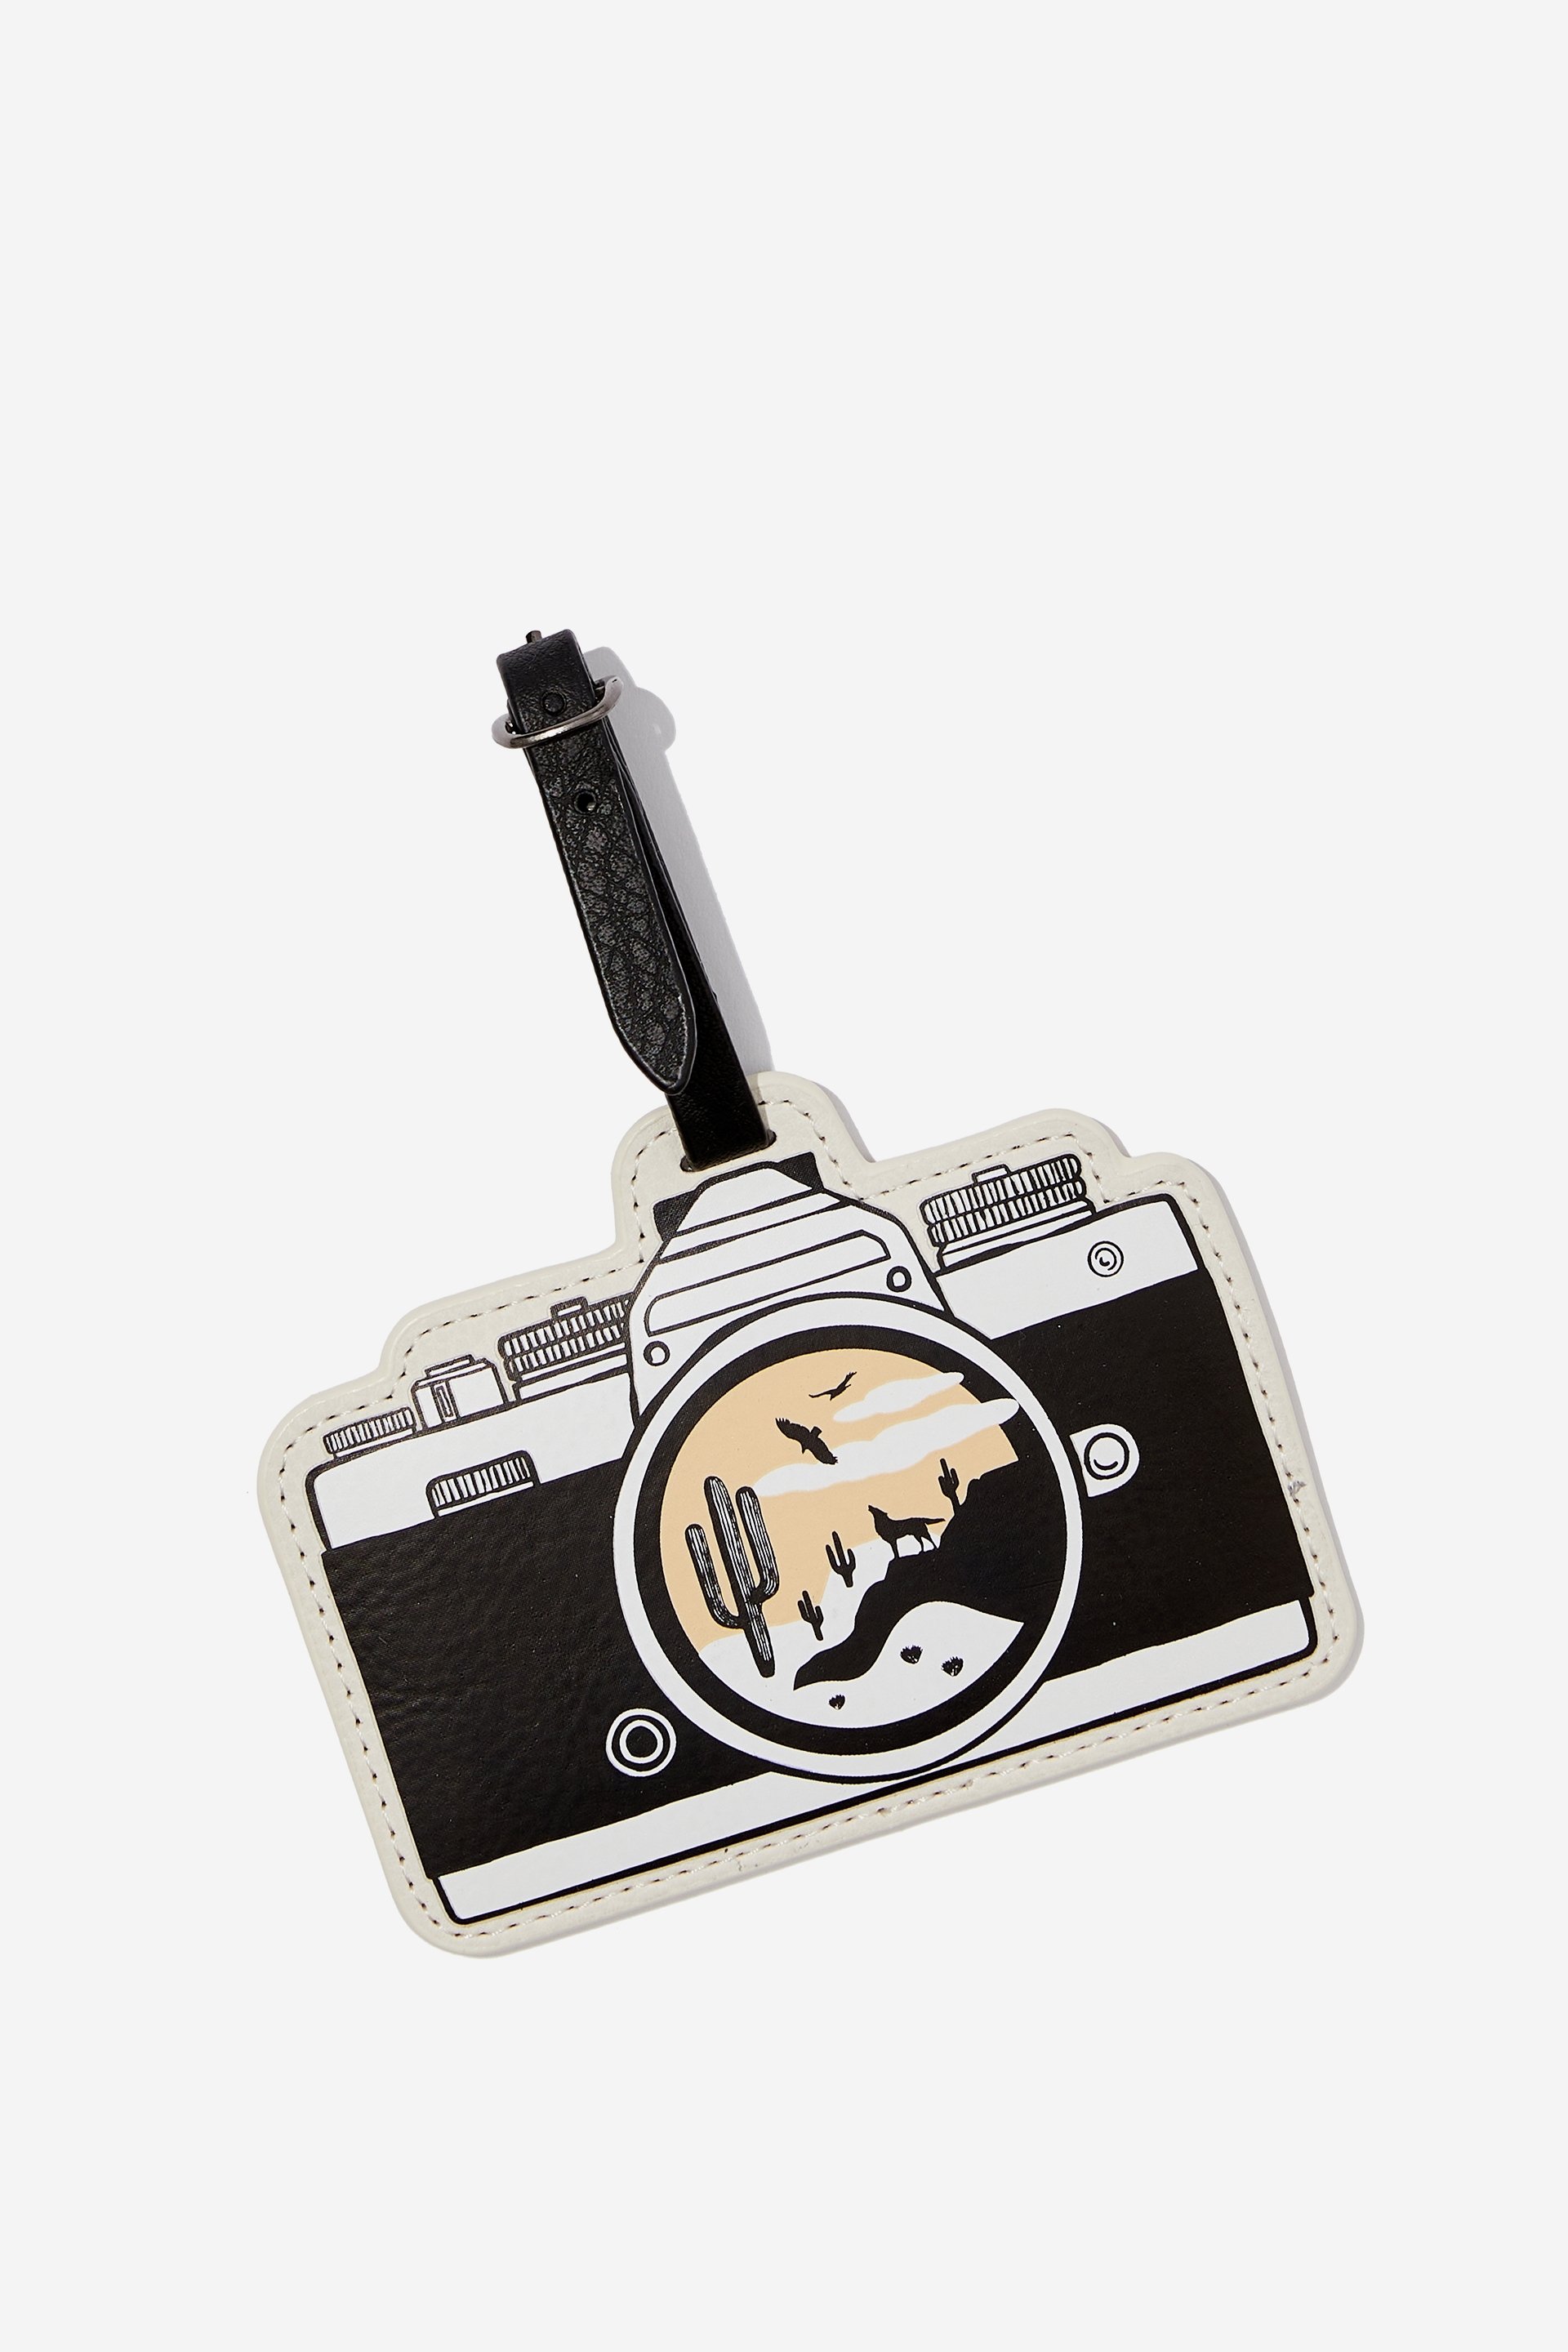 Typo - Off The Grid Luggage Tag - Camera / latte